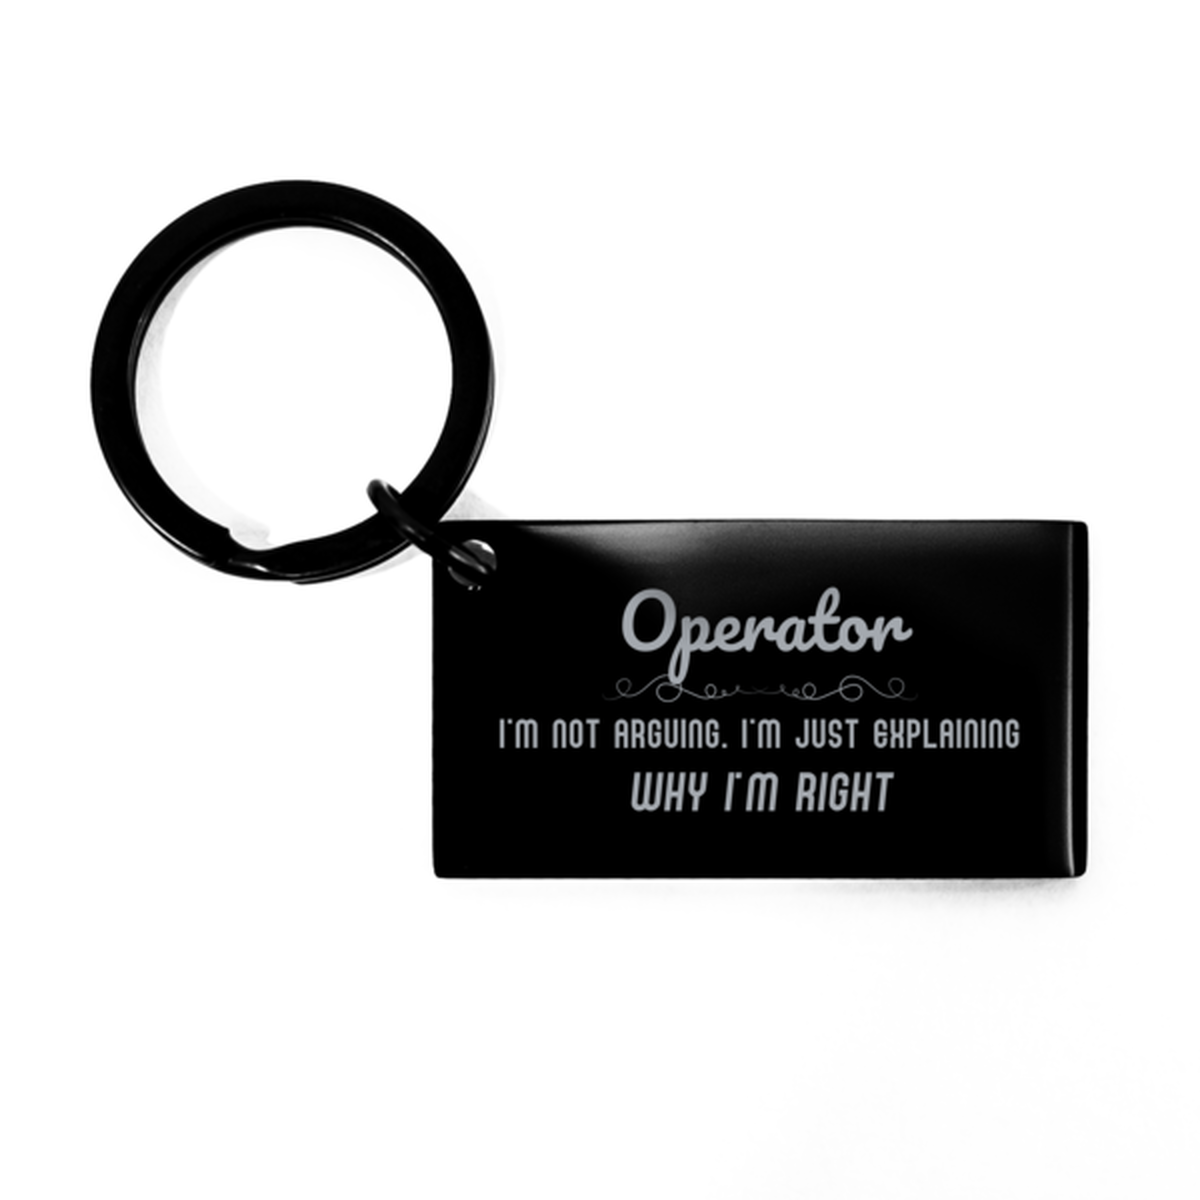 Operator I'm not Arguing. I'm Just Explaining Why I'm RIGHT Keychain, Funny Saying Quote Operator Gifts For Operator Graduation Birthday Christmas Gifts for Men Women Coworker